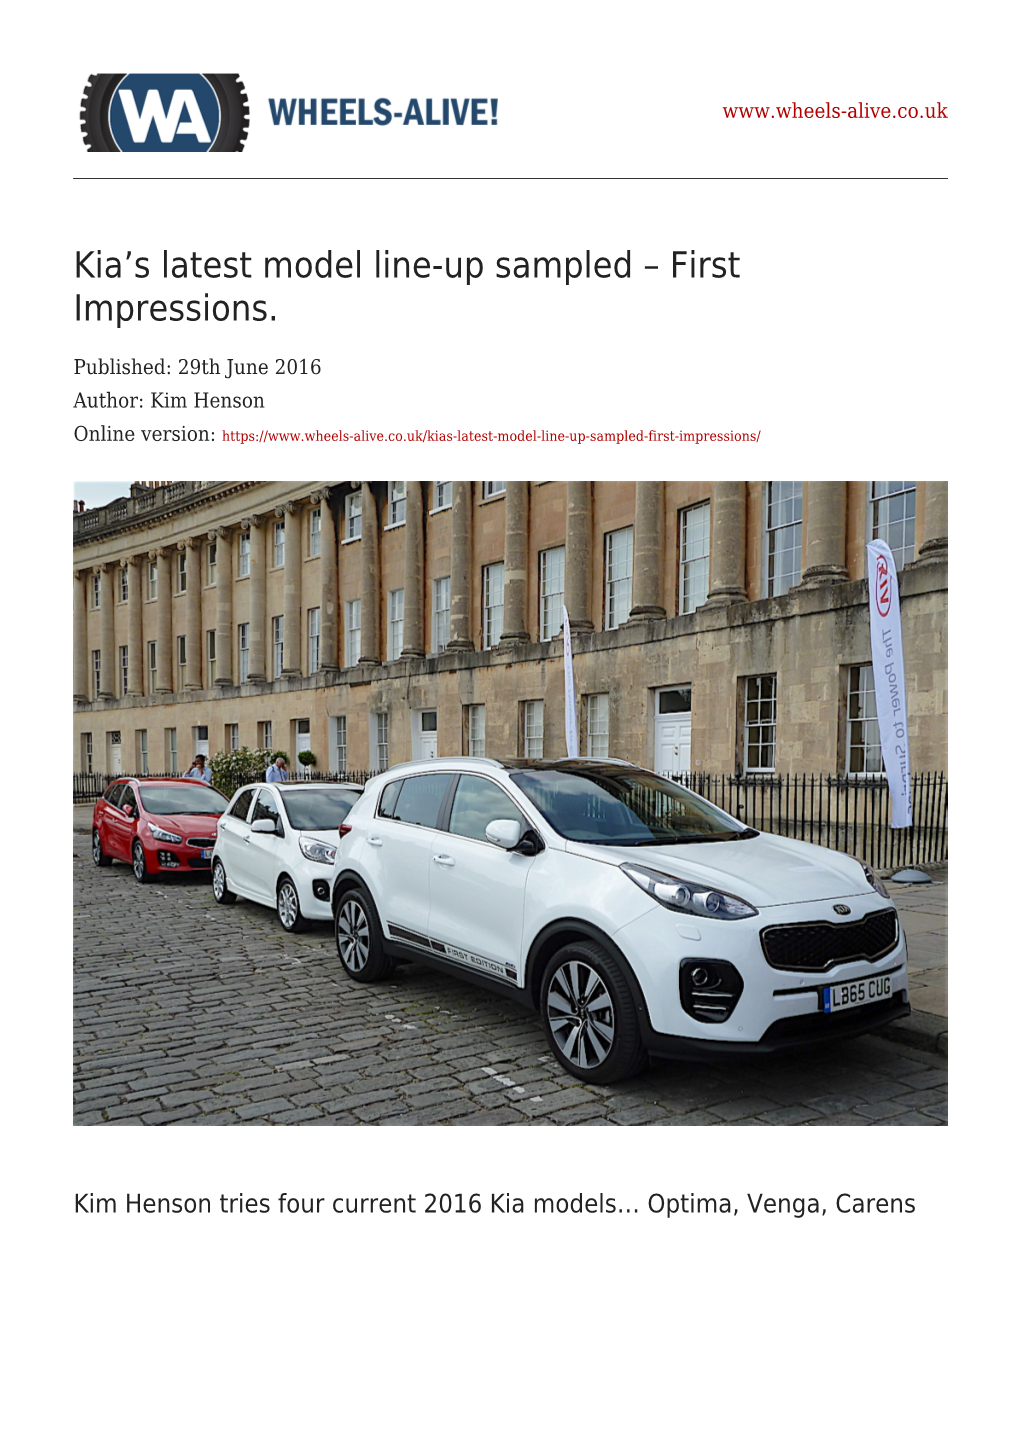 Kia's Latest Model Line-Up Sampled – First Impressions